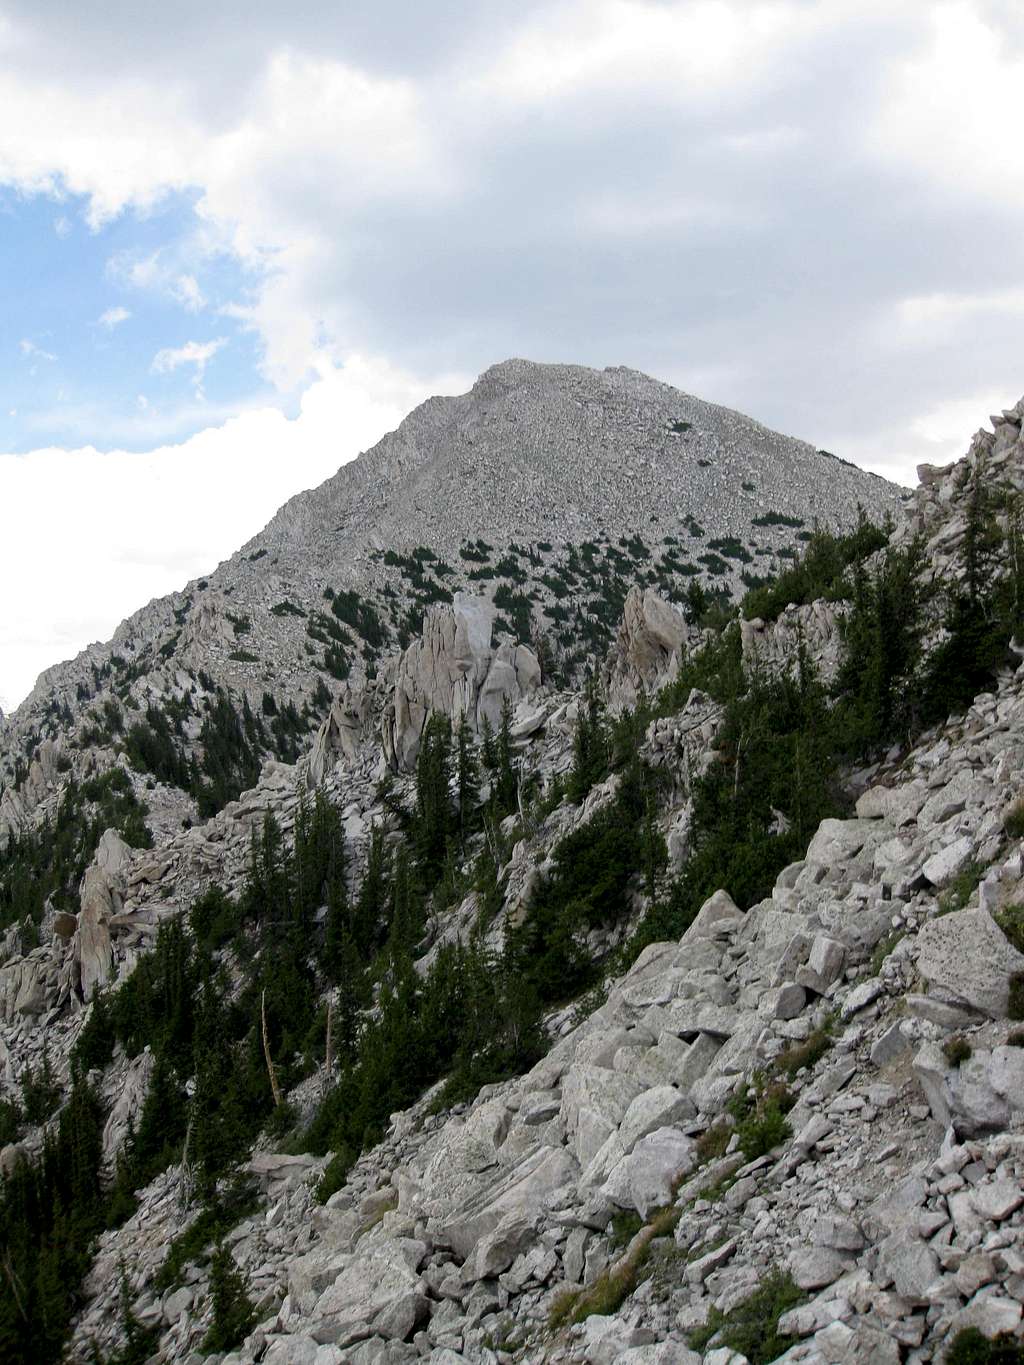 West side of the sub peak and Ibapah